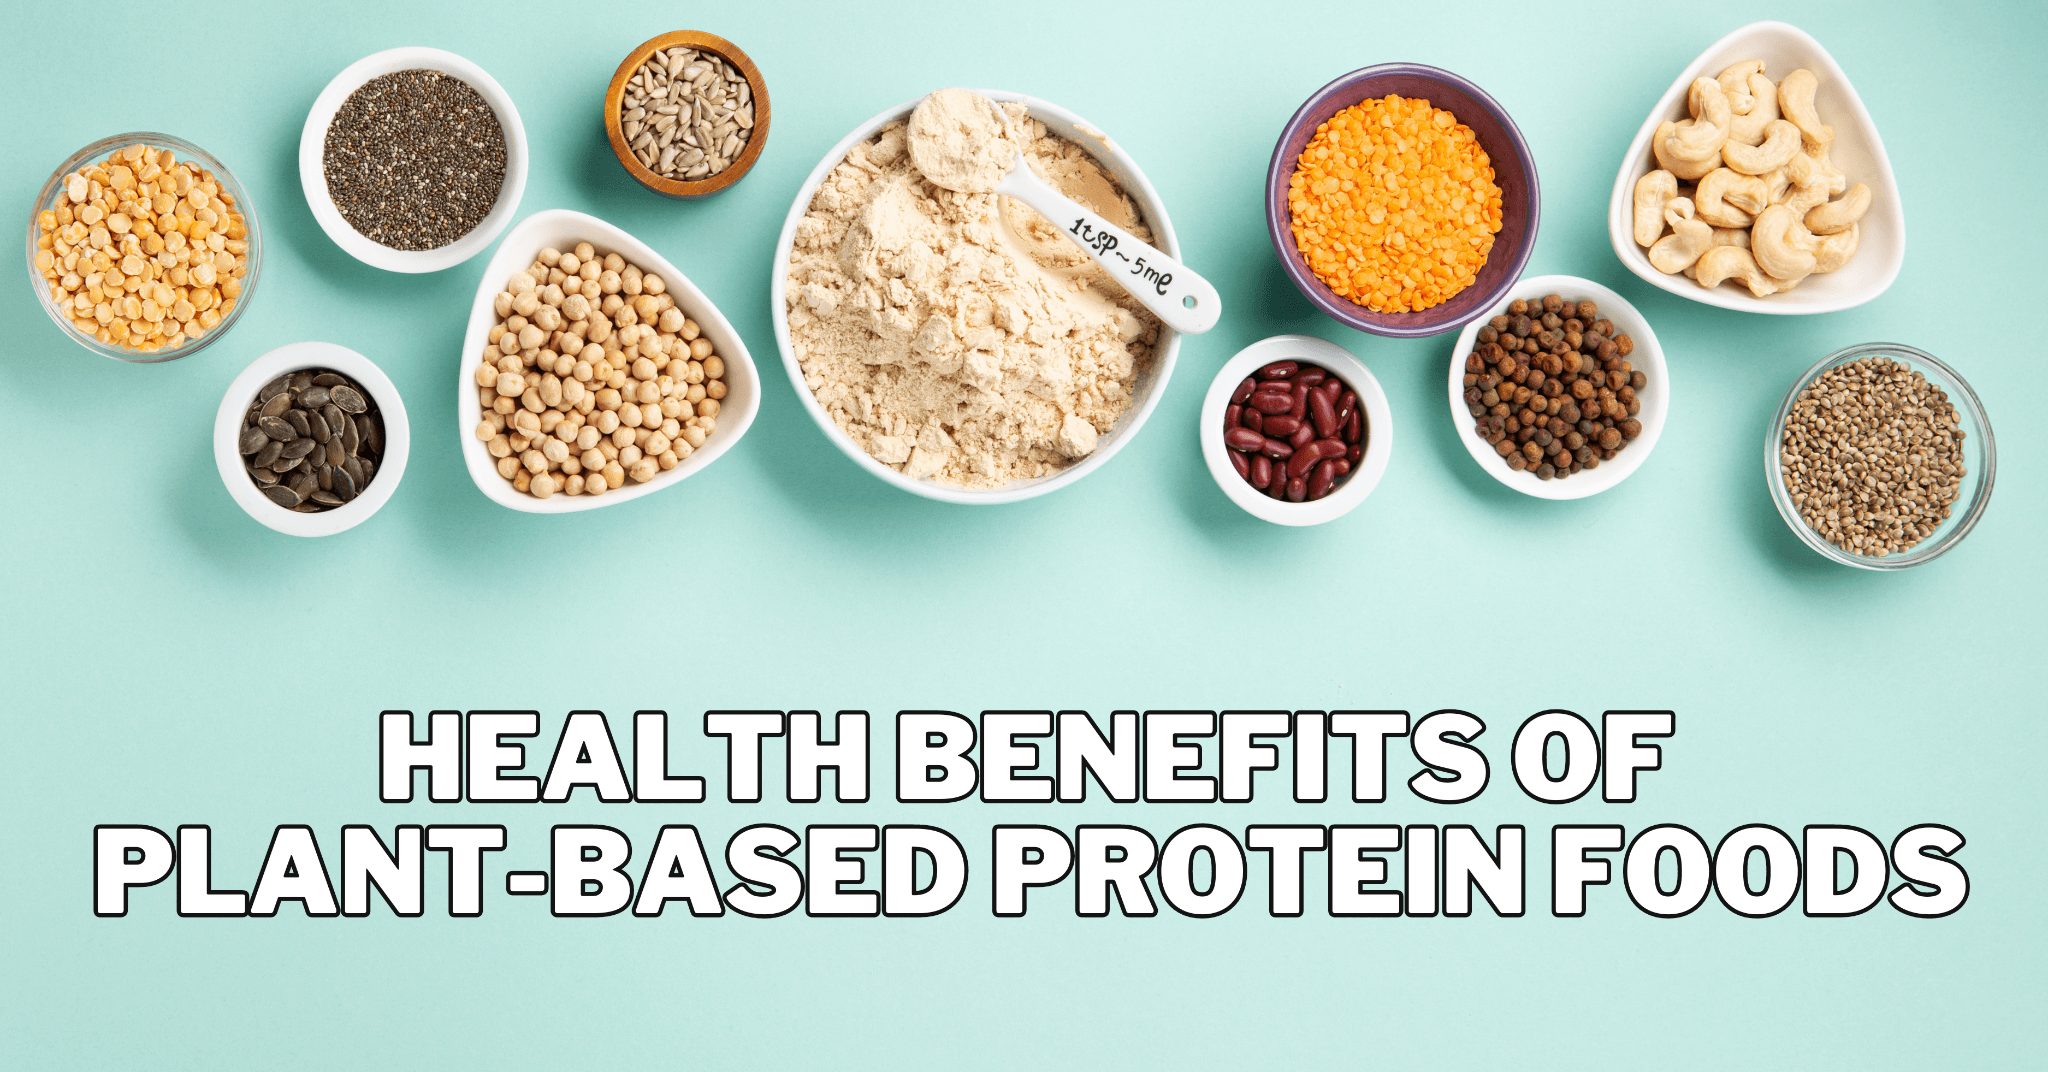 Health Benefits Of Plant-Based Protein Foods